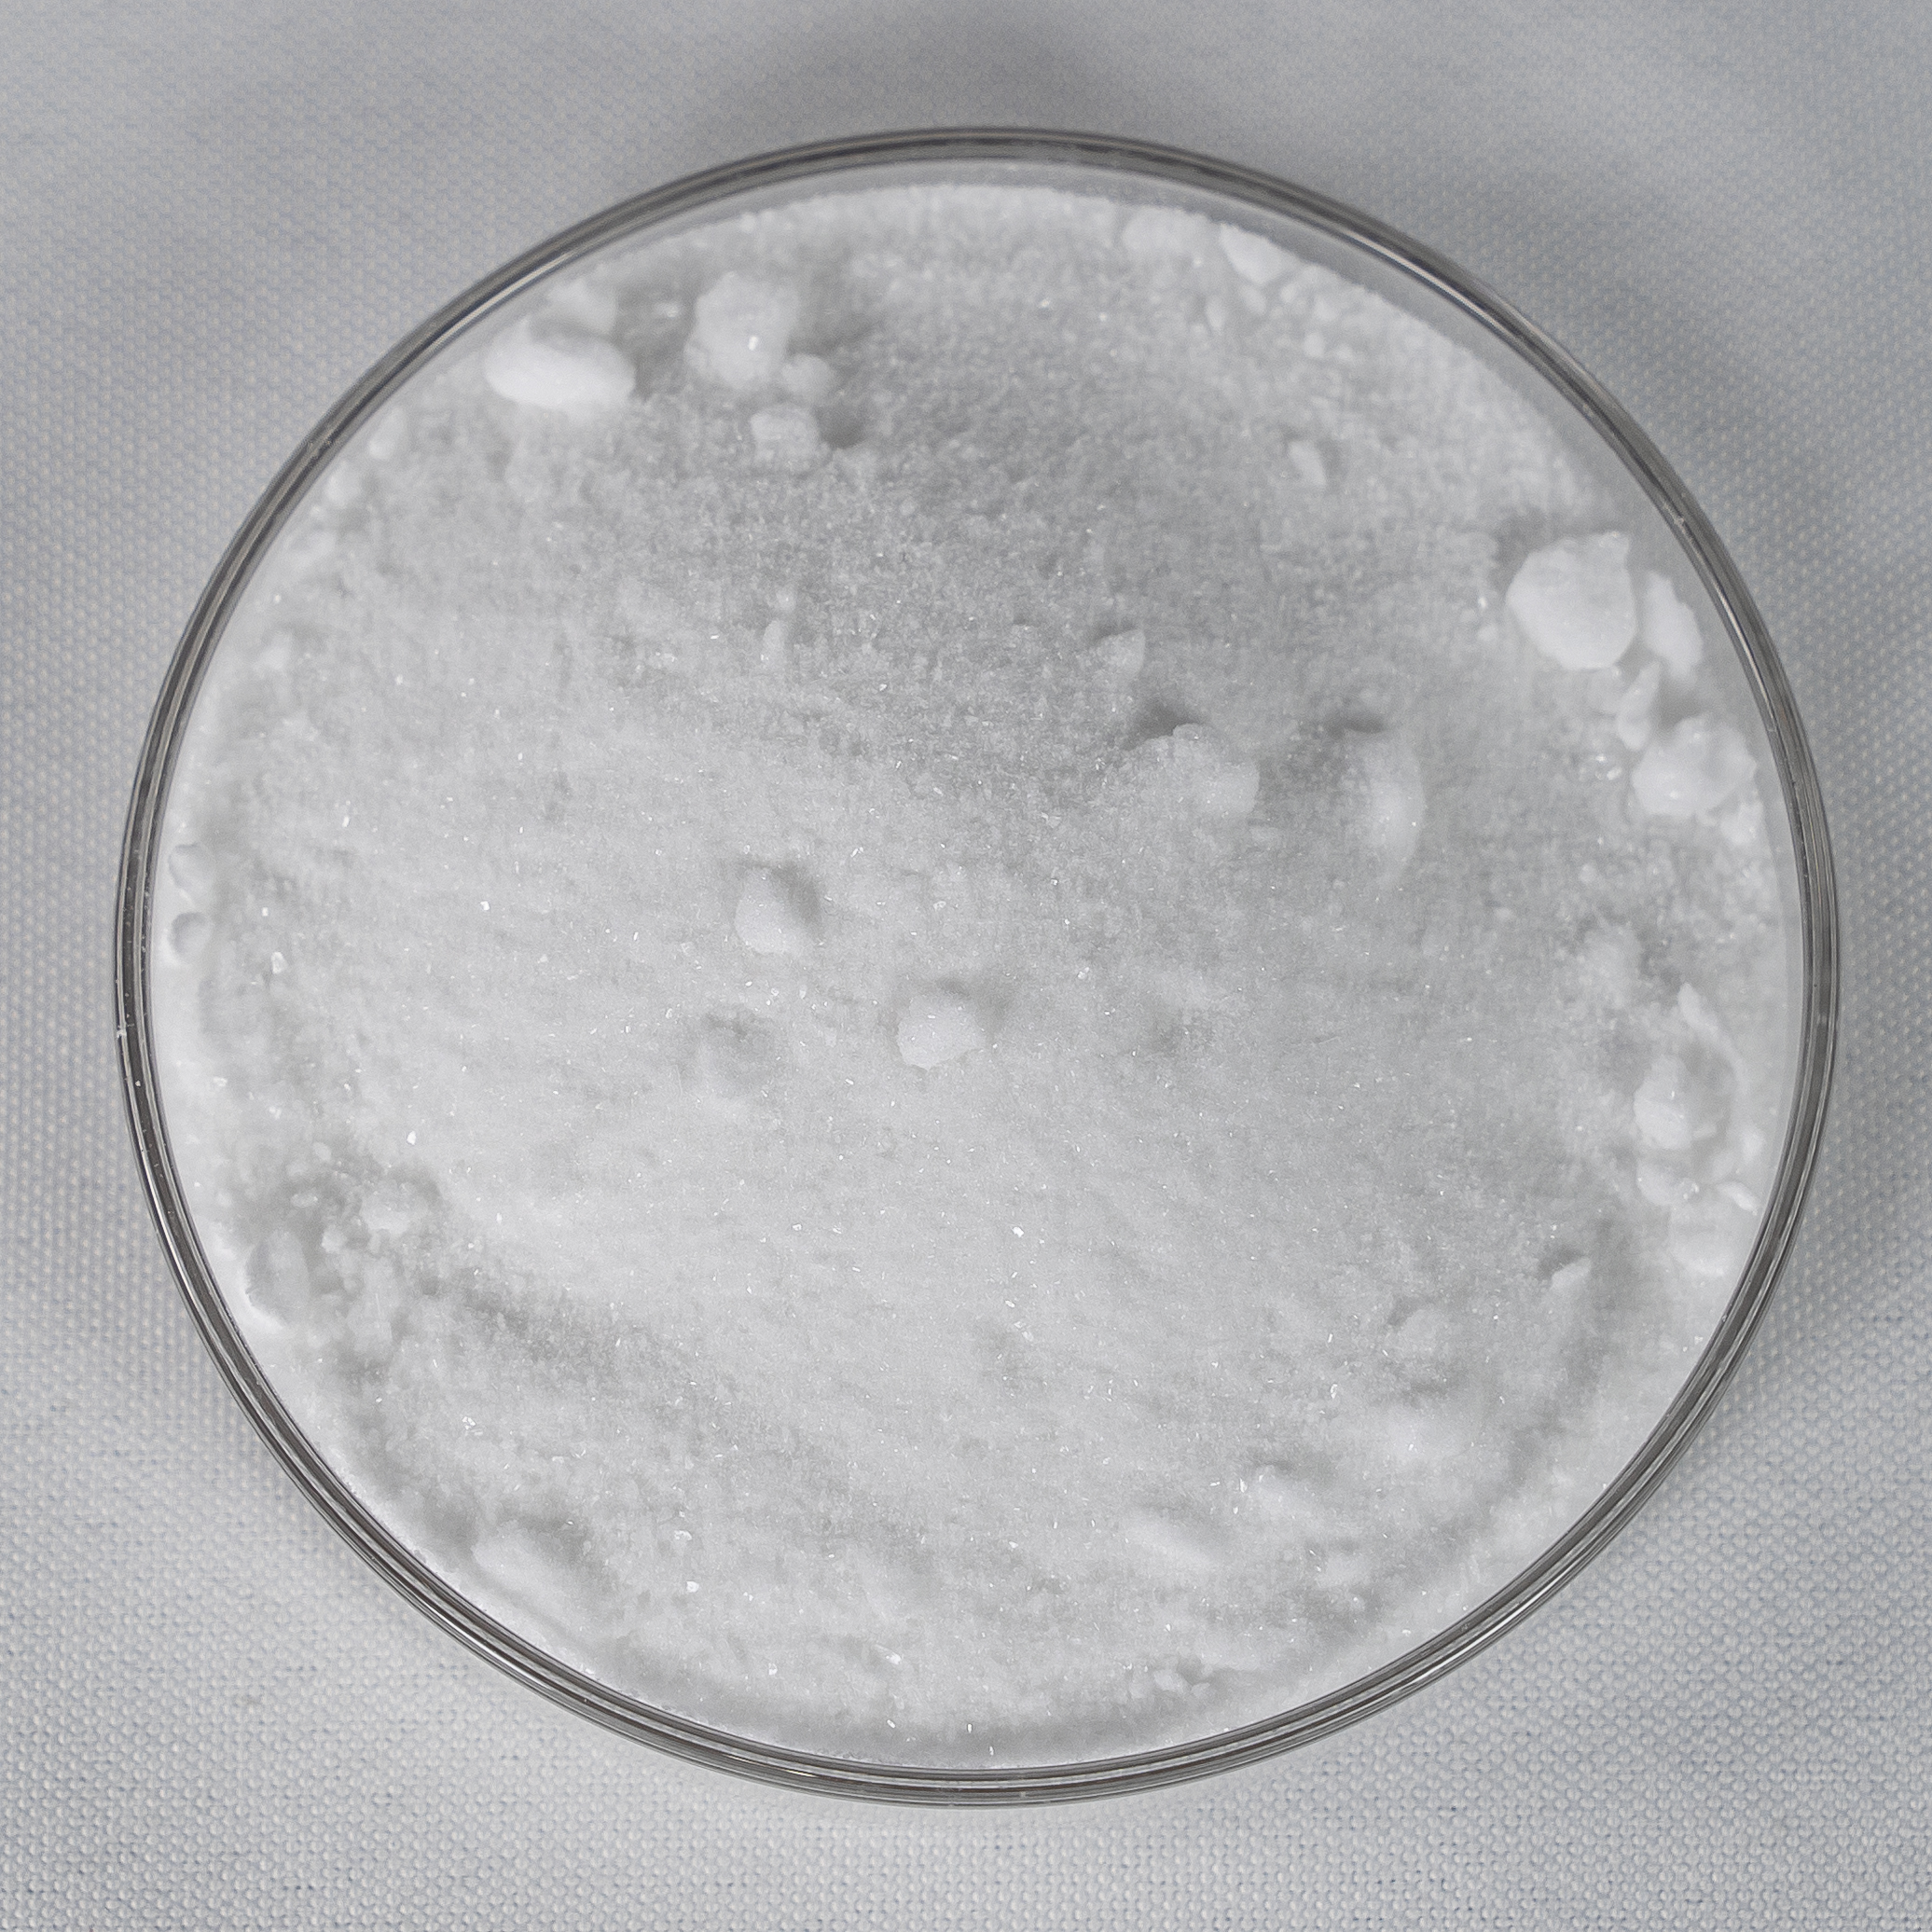 Fast Shipping High Quality Lidocaine Base / Lidocaine Hcl Powder with Safe Delivery Line CAS 137-58-6